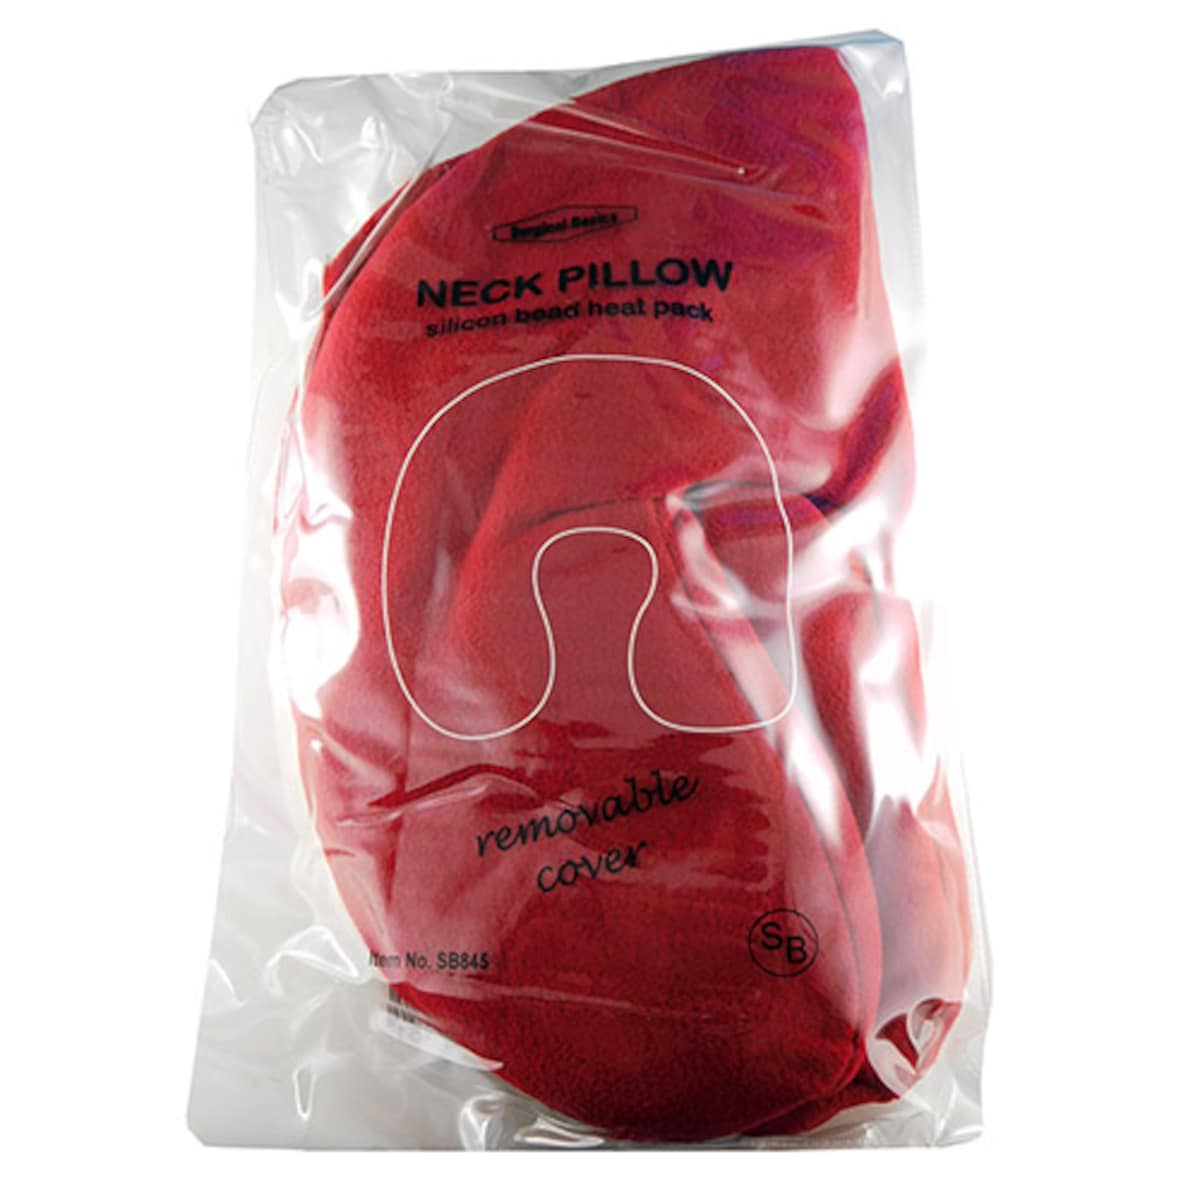 Silicone Bead Heat Pack Neck Cushion Polar Fleece Cover 1 Pack (Colours selected at random)